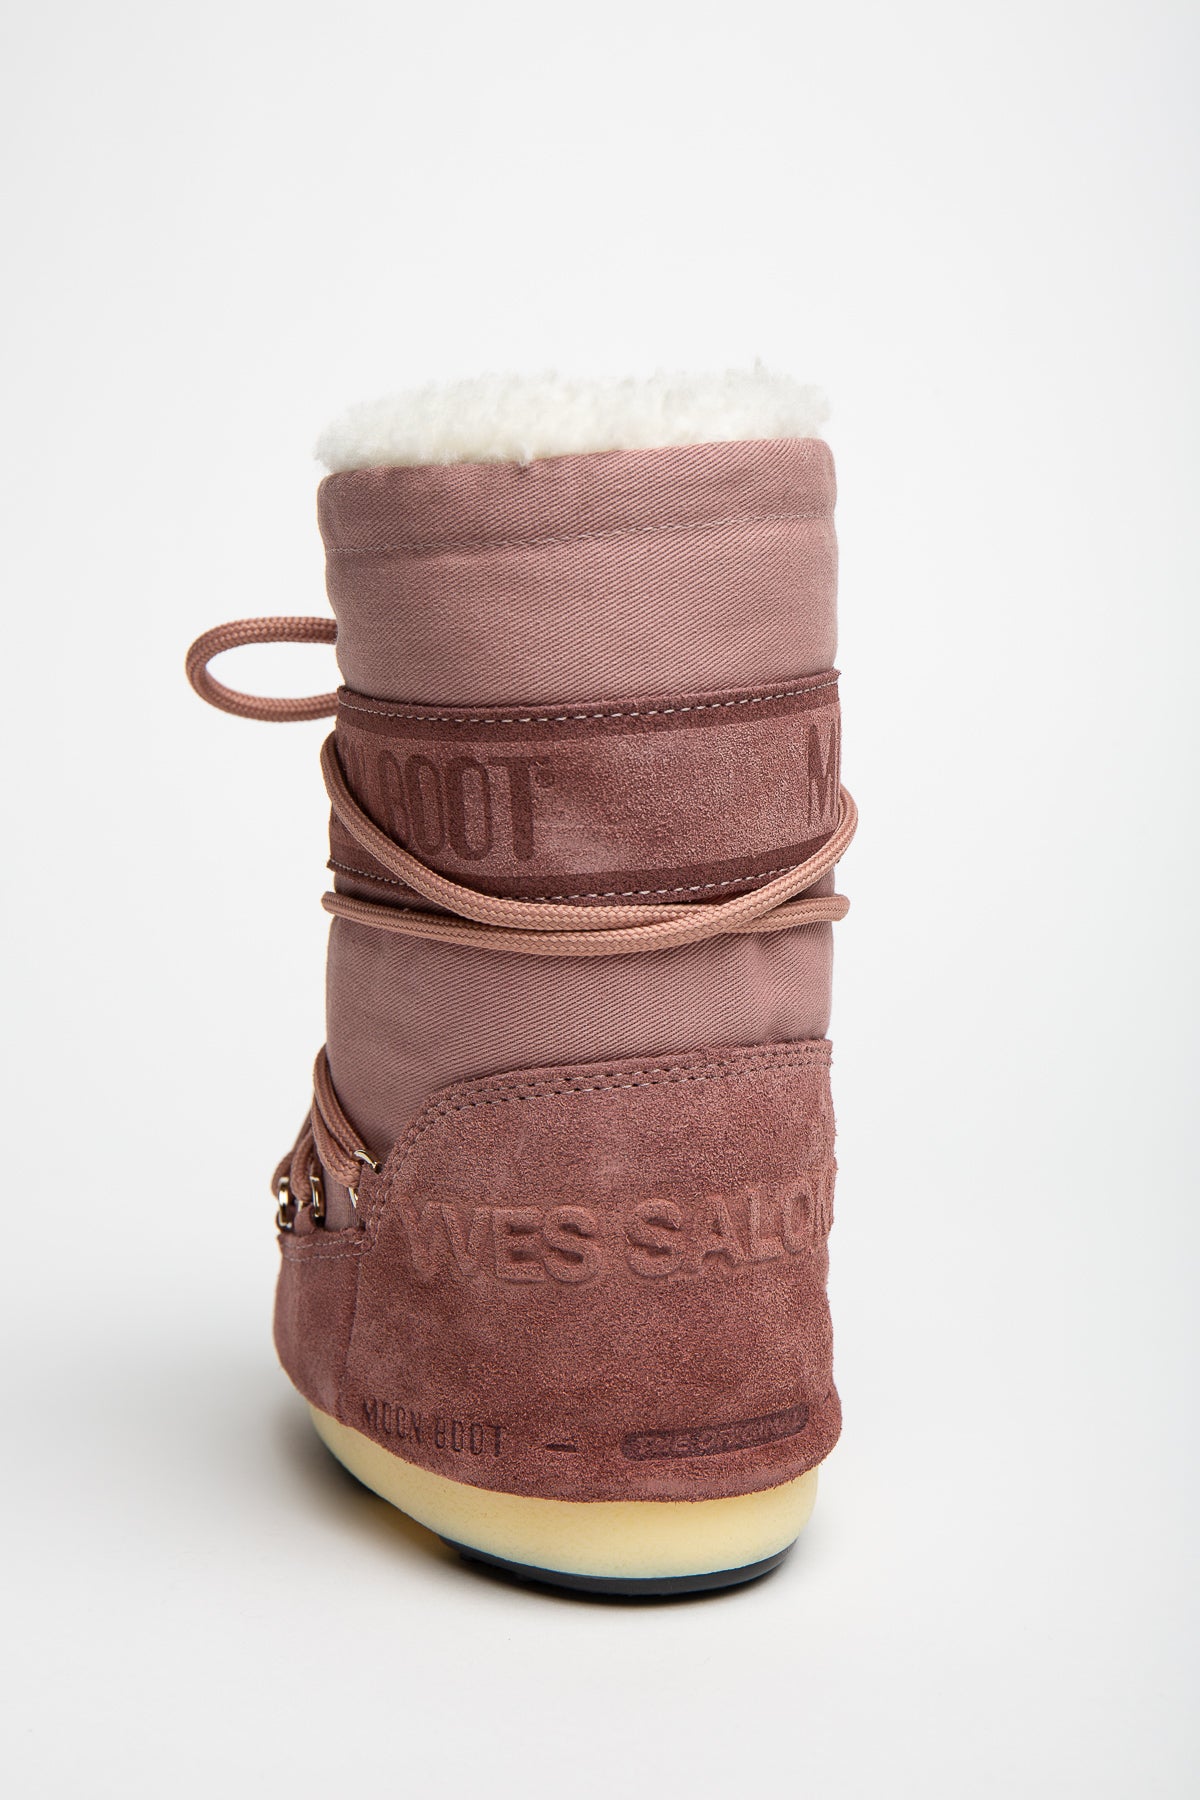 MAXFIELD PRIVATE COLLECTION | KIDS MOON BOOTS